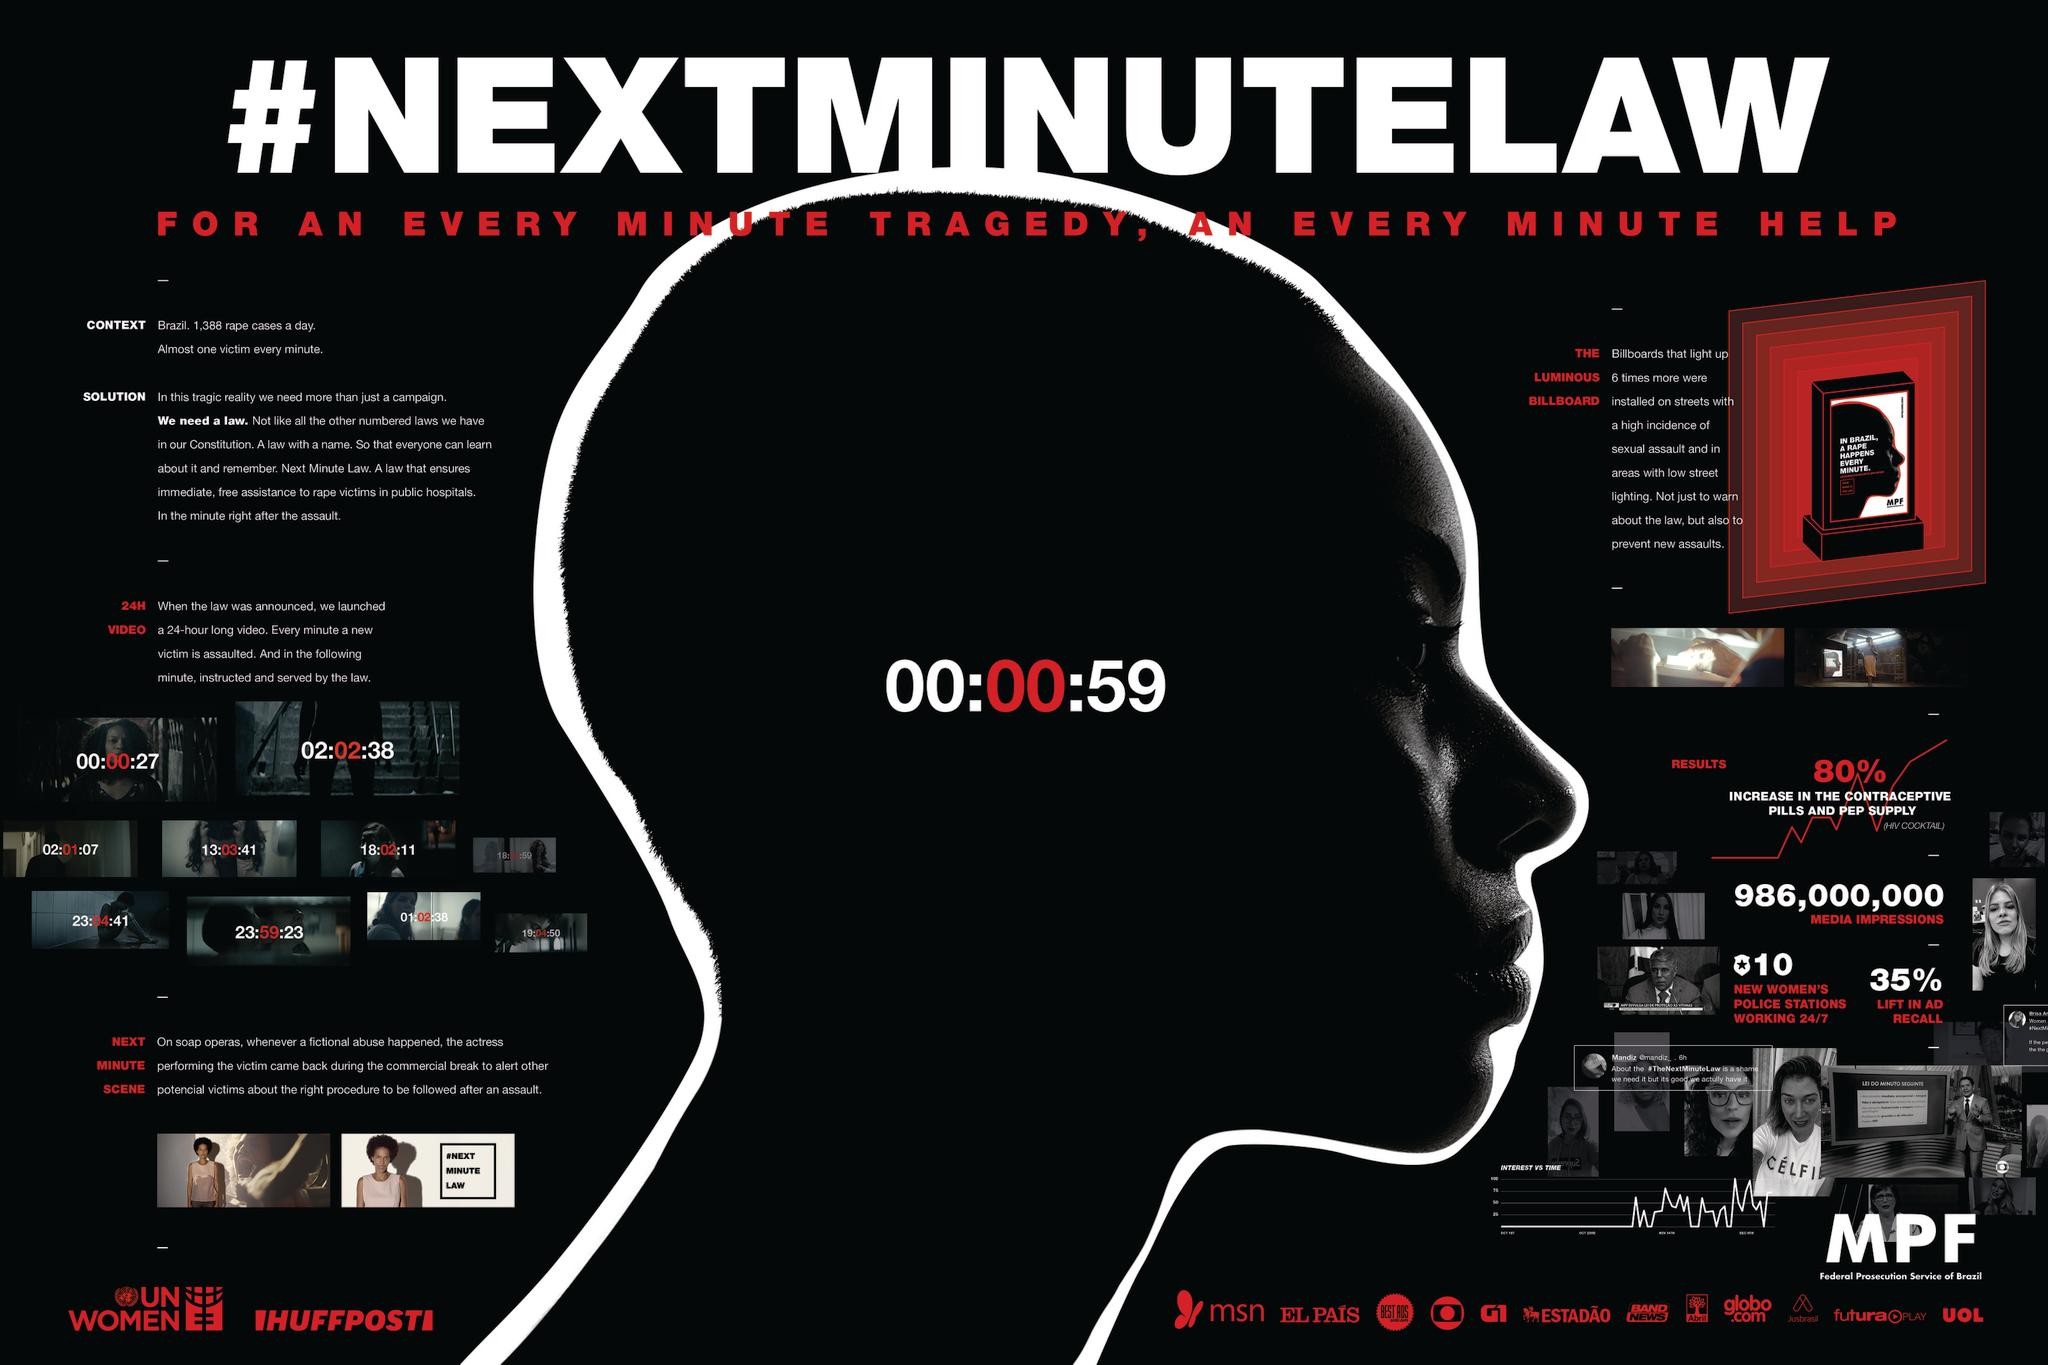 NEXT MINUTE LAW